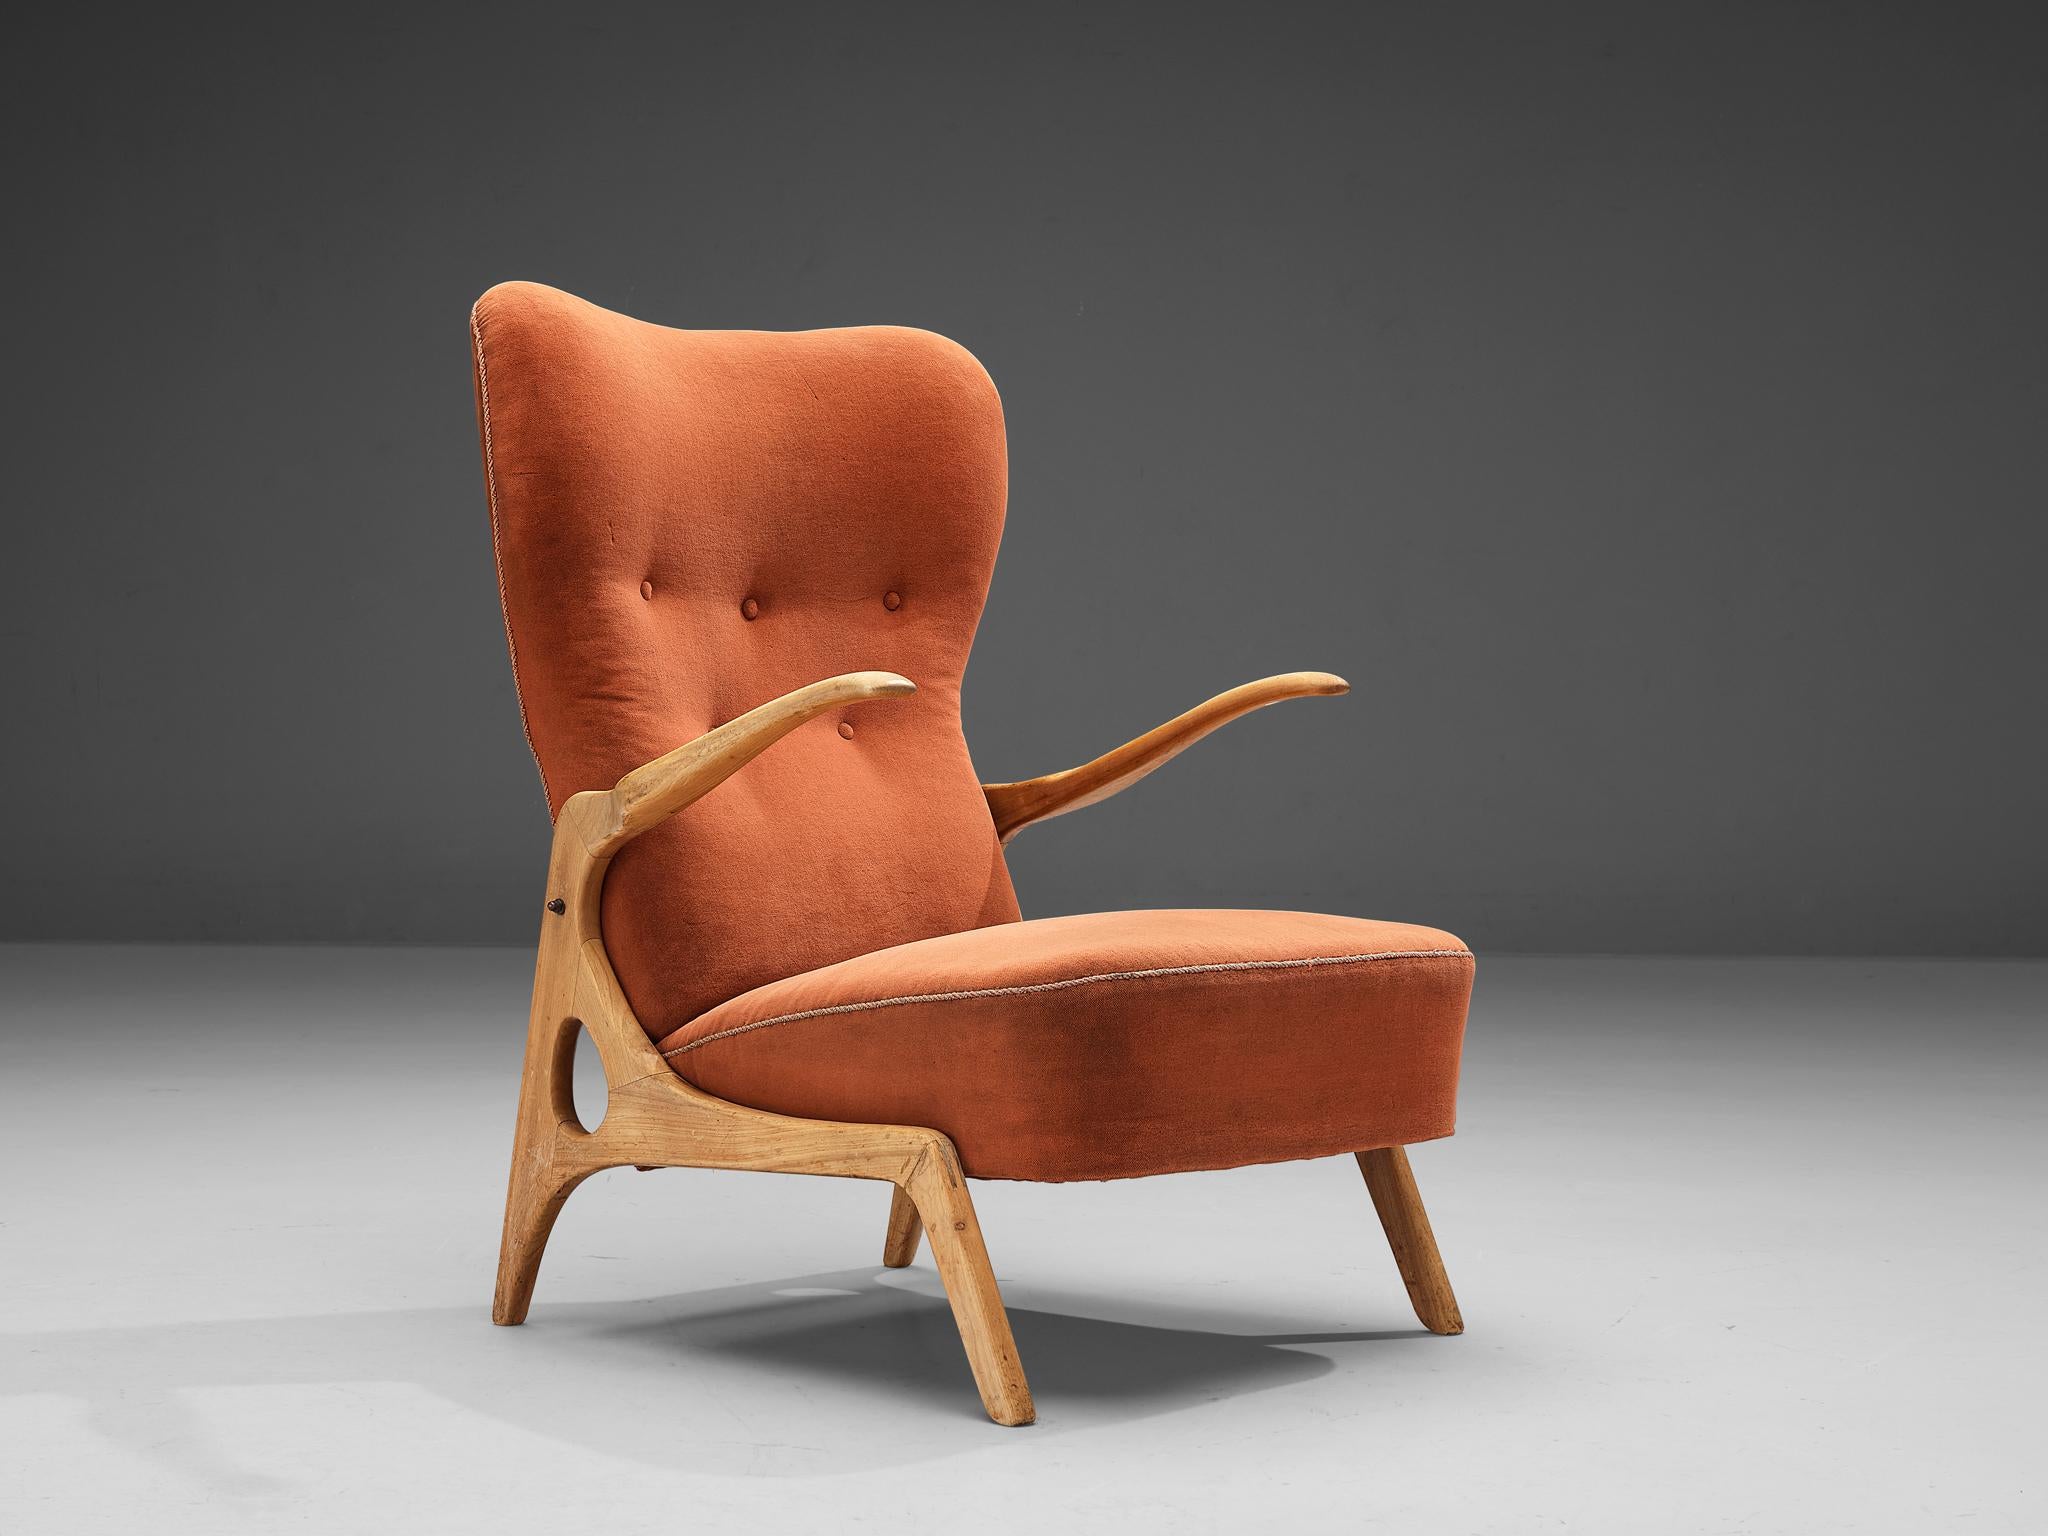 Lounge chair, pine, fabric, Italy, 1950s

This well-designed lounge chair features a characteristic wooden frame executed in cherry. The biomorphic looking armrests represent naturally occurring shapes reminiscent of nature. These patterns are also